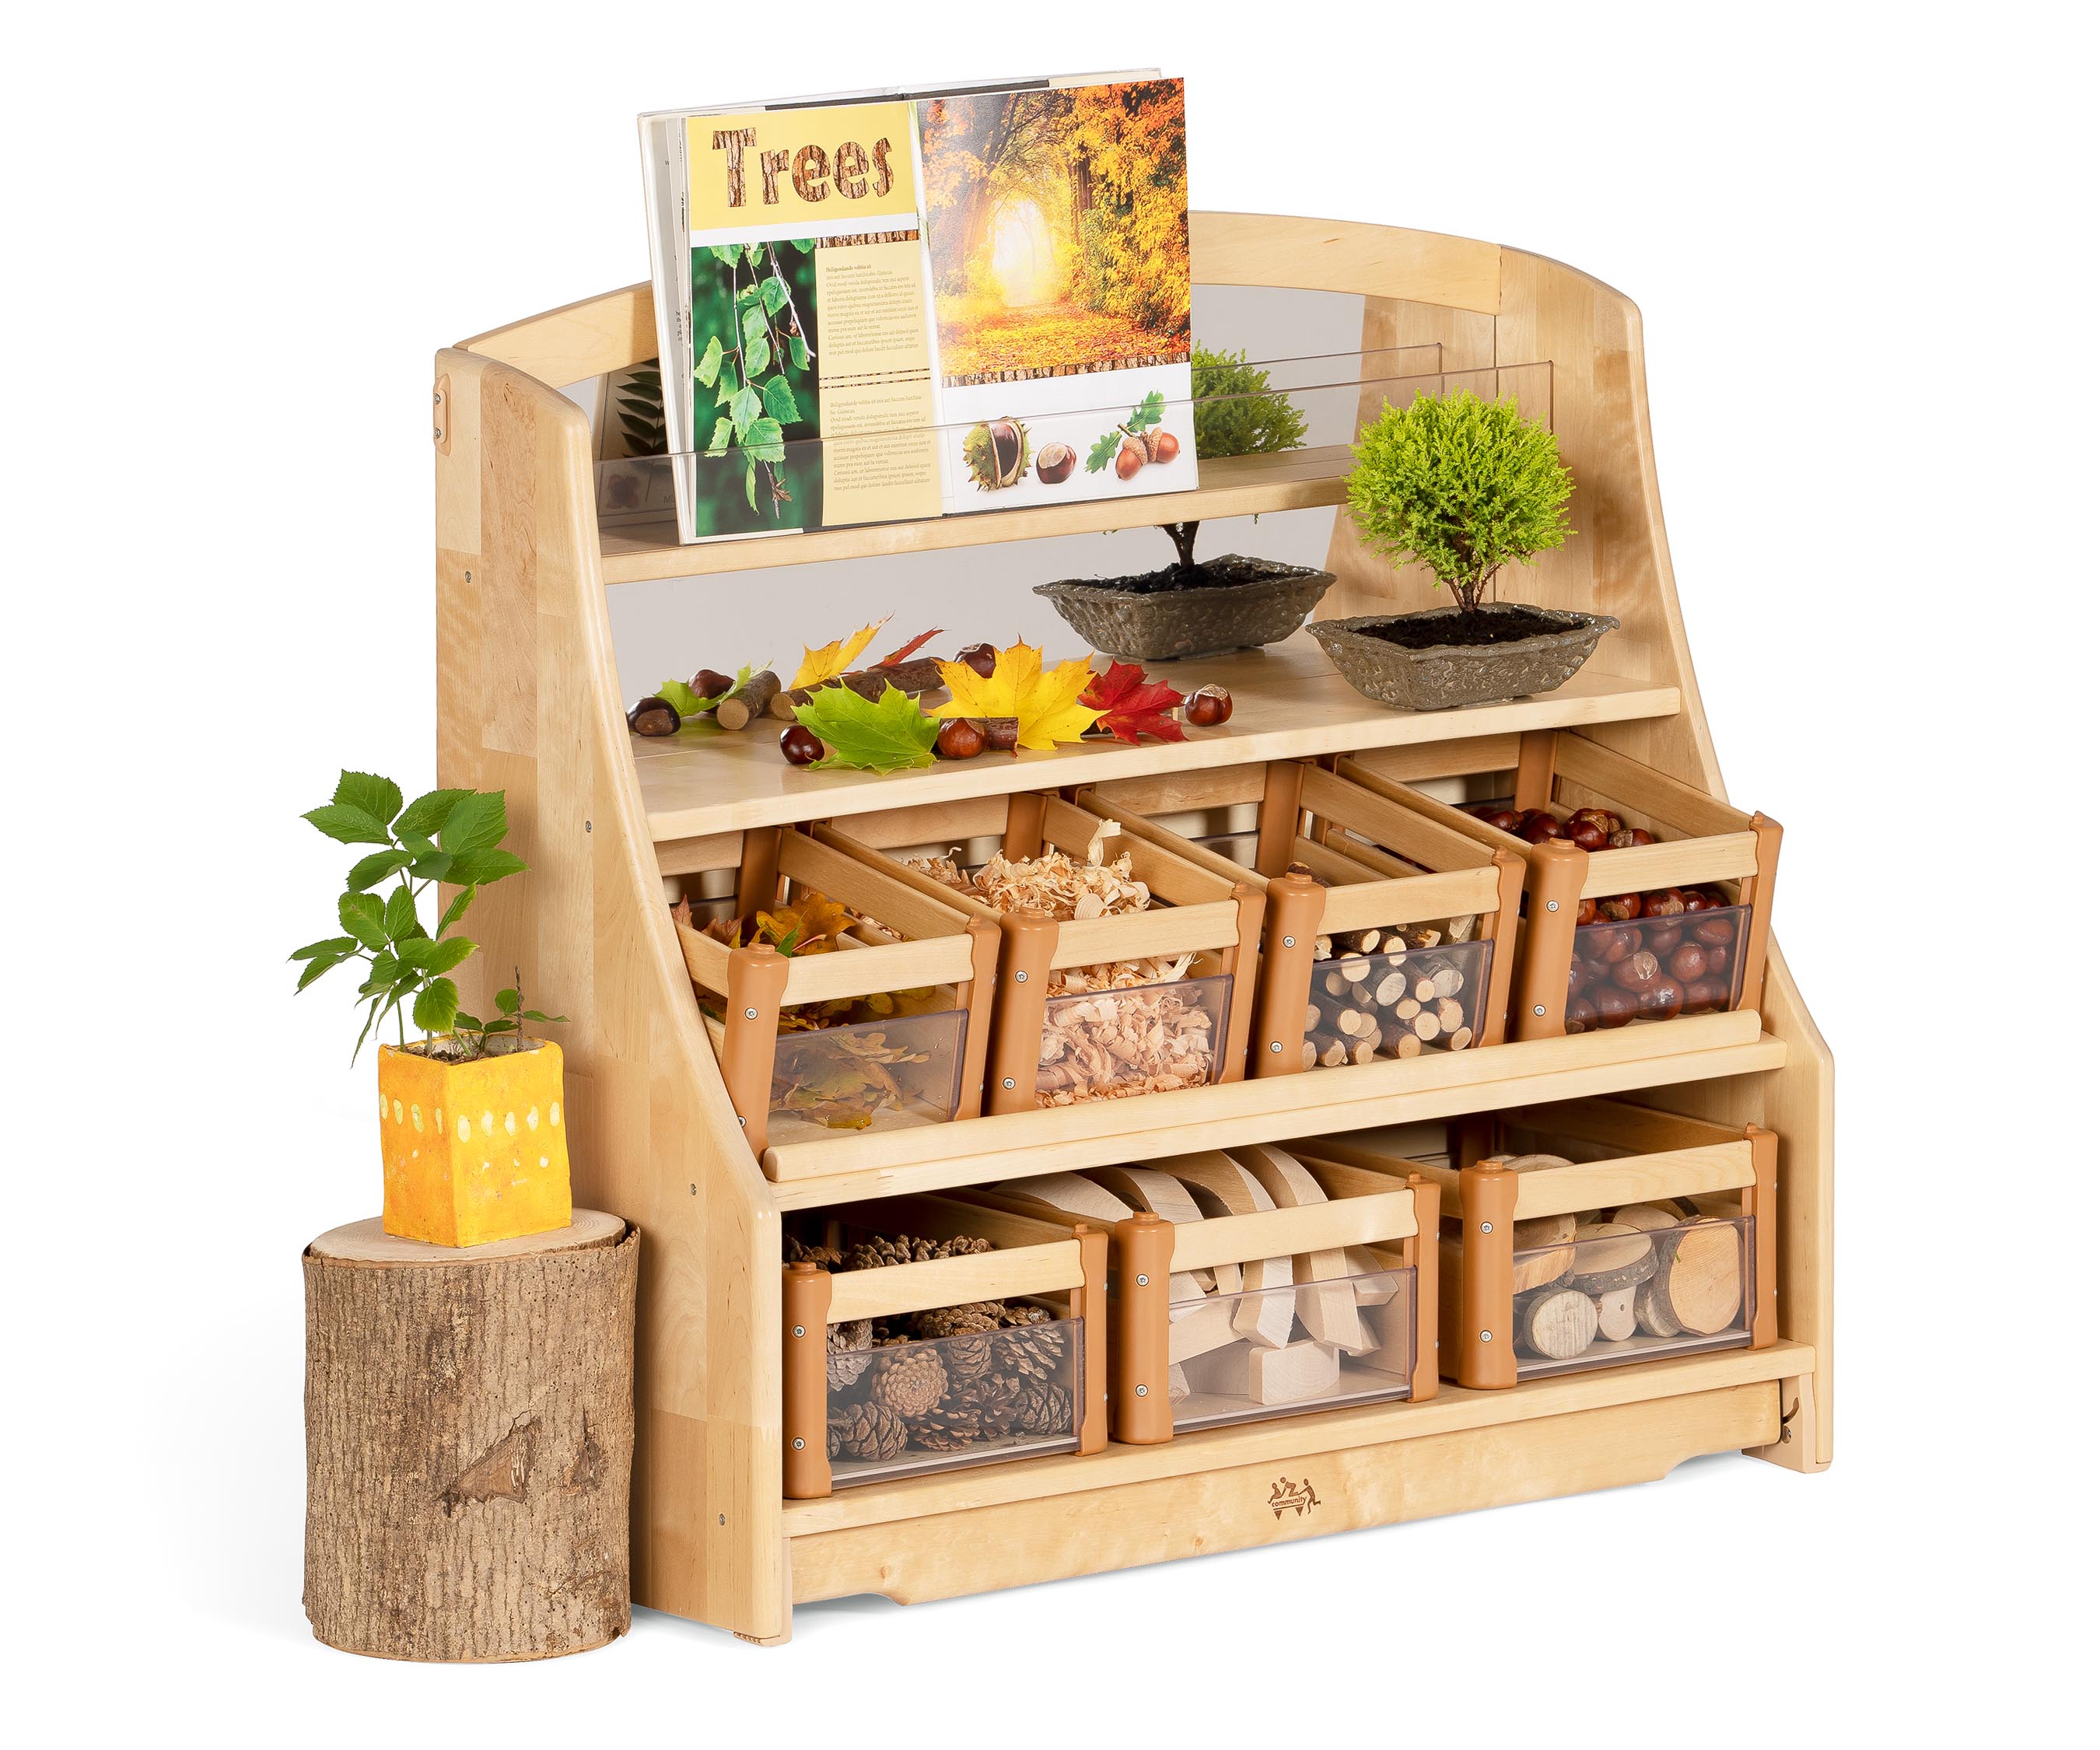 Display shelf with natural materials